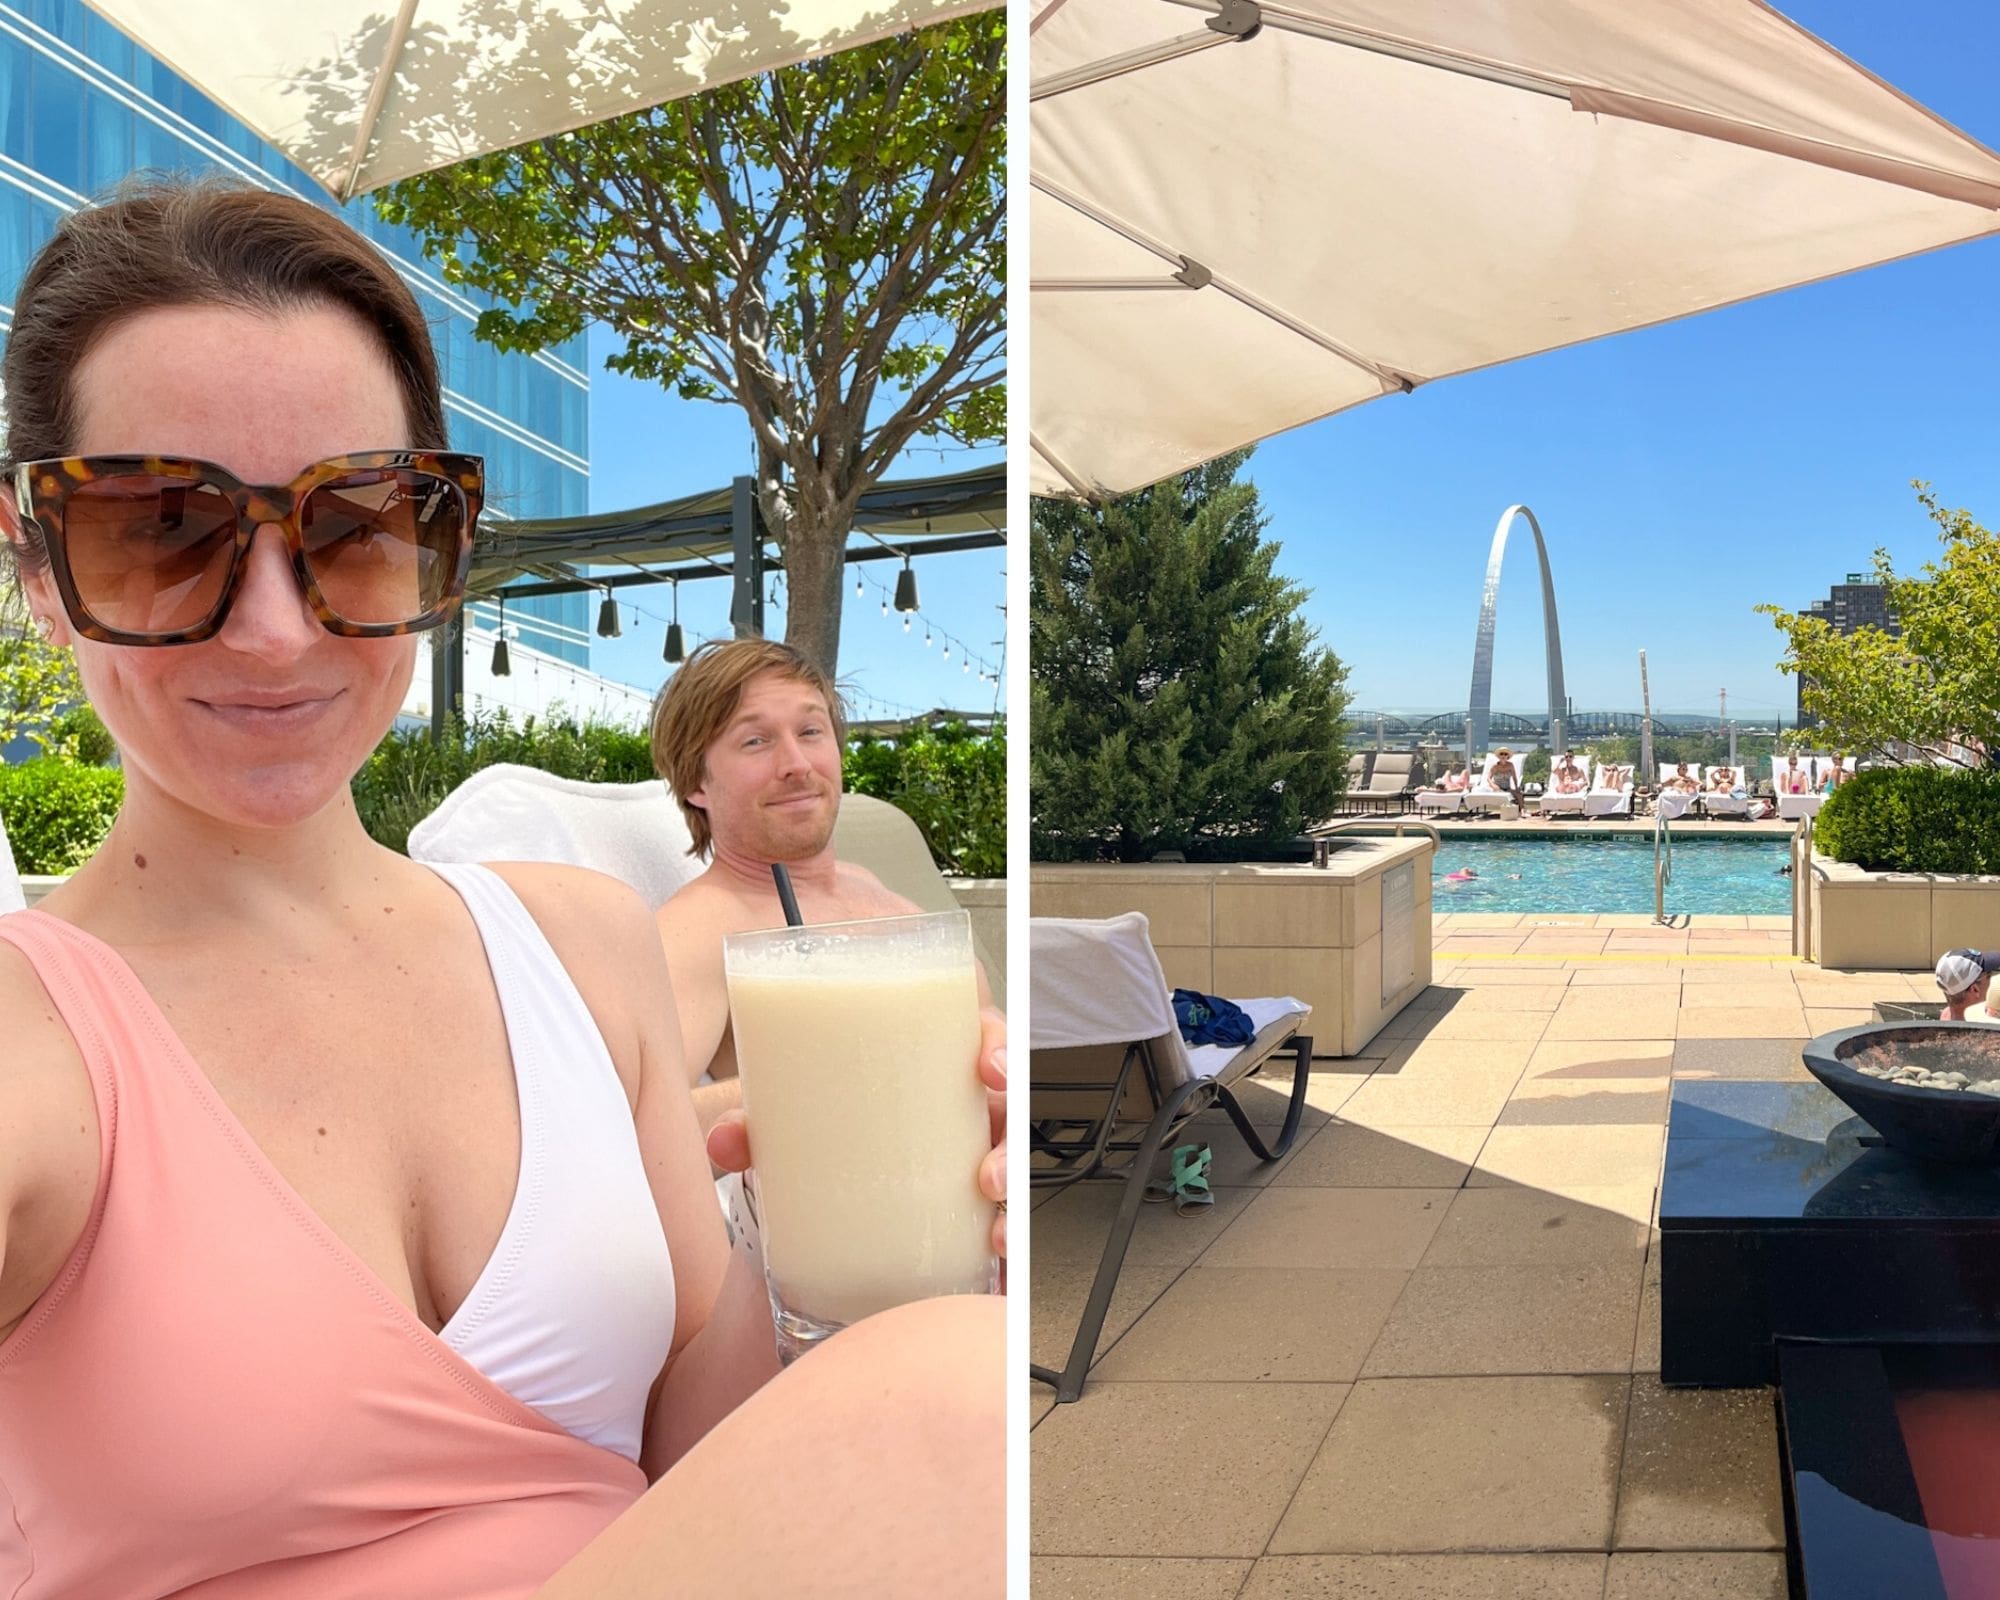 Blogger Stephanie Ziajka shares her experience at the Four Seasons Hotel St Louis pool on Diary of a Debutante